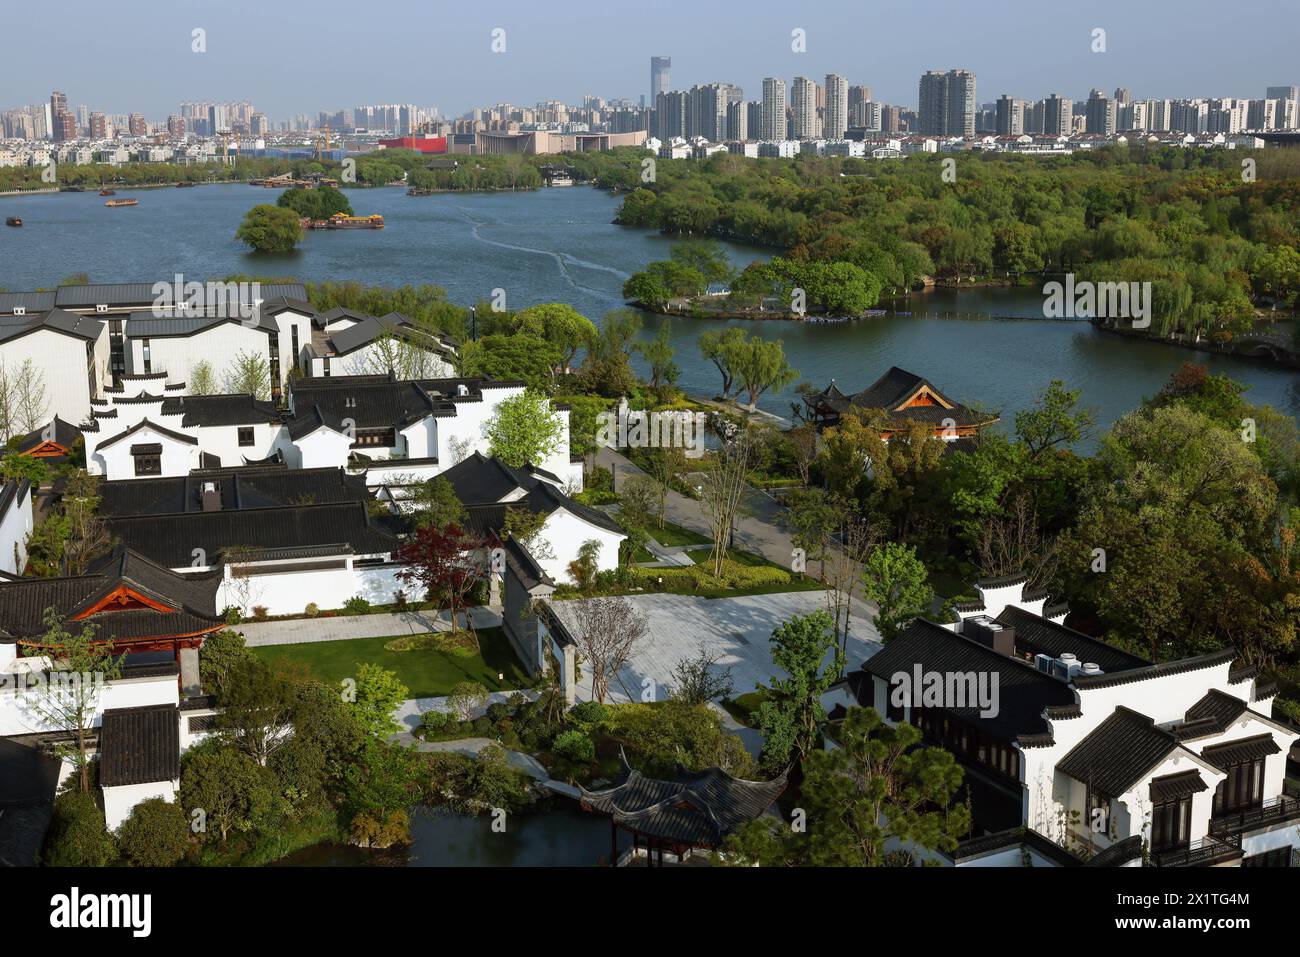 (240418) -- JIAXING(ZHEJIANG), April 18, 2024 (Xinhua) -- Ancient dwellings are seen against the distant city skyline near the Nanhu Lake in Jiaxing City, east China's Zhejiang Province, April 10, 2024. Located in east China's Zhejiang Province, the waterside city Jiaxing is renowned for tourist destinations Nanhu Lake and Wuzhen. In the breezy month of April, the two tourist hotspots come alive with the gentle touch of spring. Nanhu Lake, with its shimmering waters and willow trees swaying along the lakeside, is a sight to behold. The historic water town Wuzhen also enchants with its emer Stock Photo